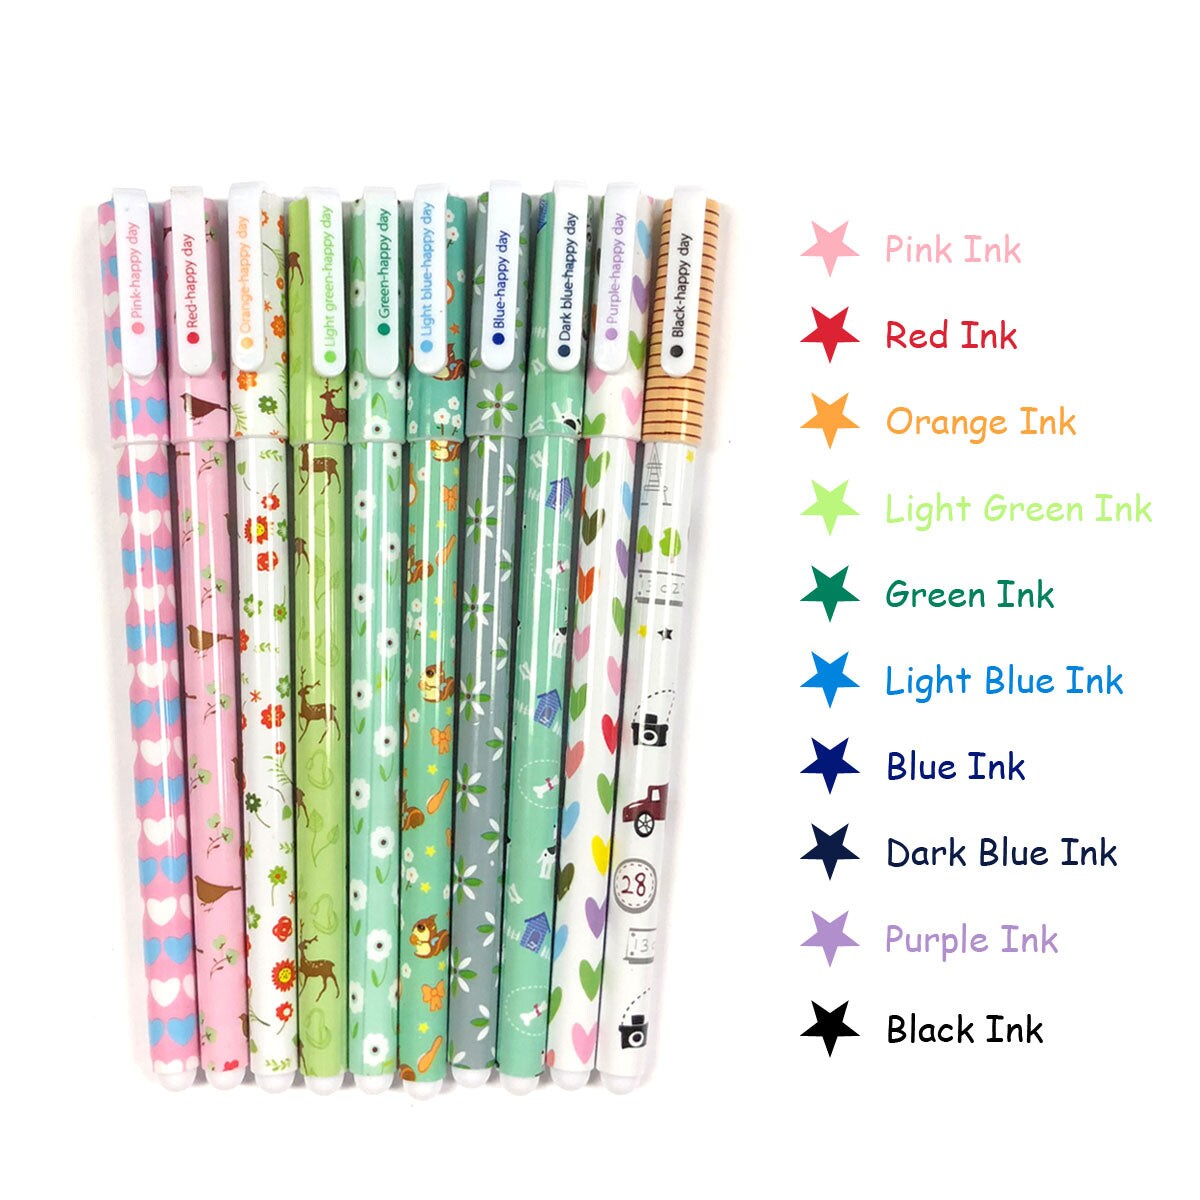 Wrapables Cute Novelty Gel Ink Pens, 0.5mm Fine Point (Set of 10) for School, Office, Stationery Whimsical Multicolor Ink